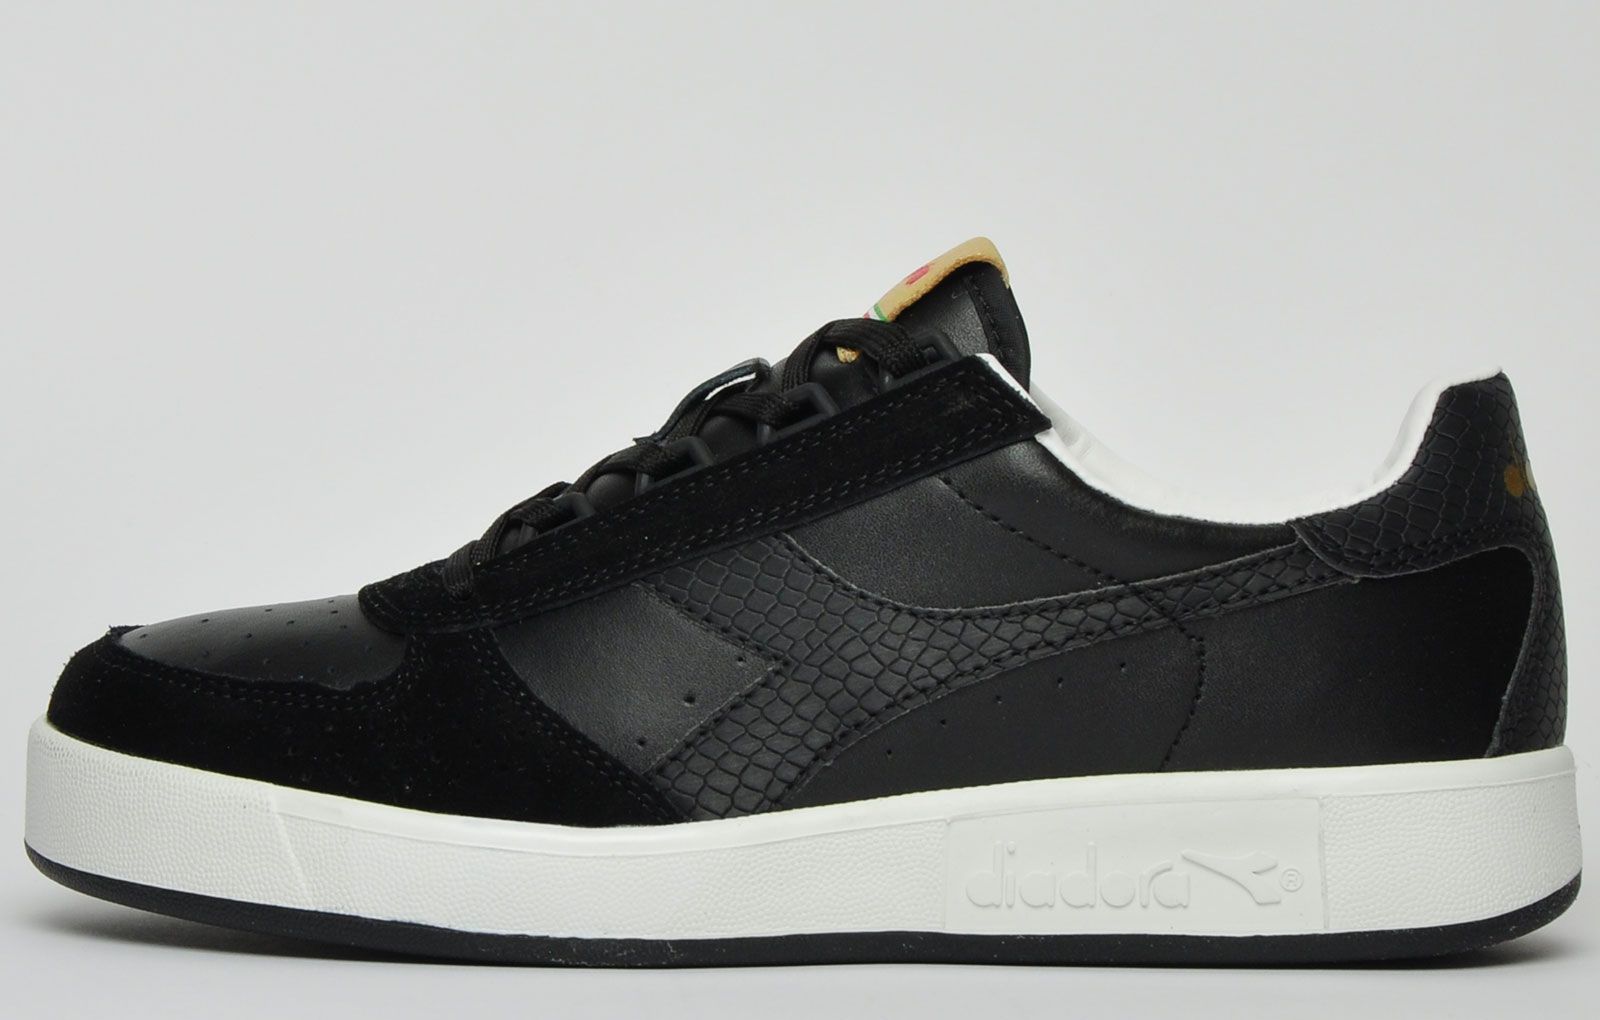 <p>Mixing sporty and urban fashion, these Diadora Borg Elite men’s leather trainers made from a mix of leather and suede for a 5 star fit and finish. The vintage textured outsole and comfortable inner lining give this classic a versatile and stylish look, making this trainer a must have for the coming seasons. <br></p><br> <p class=